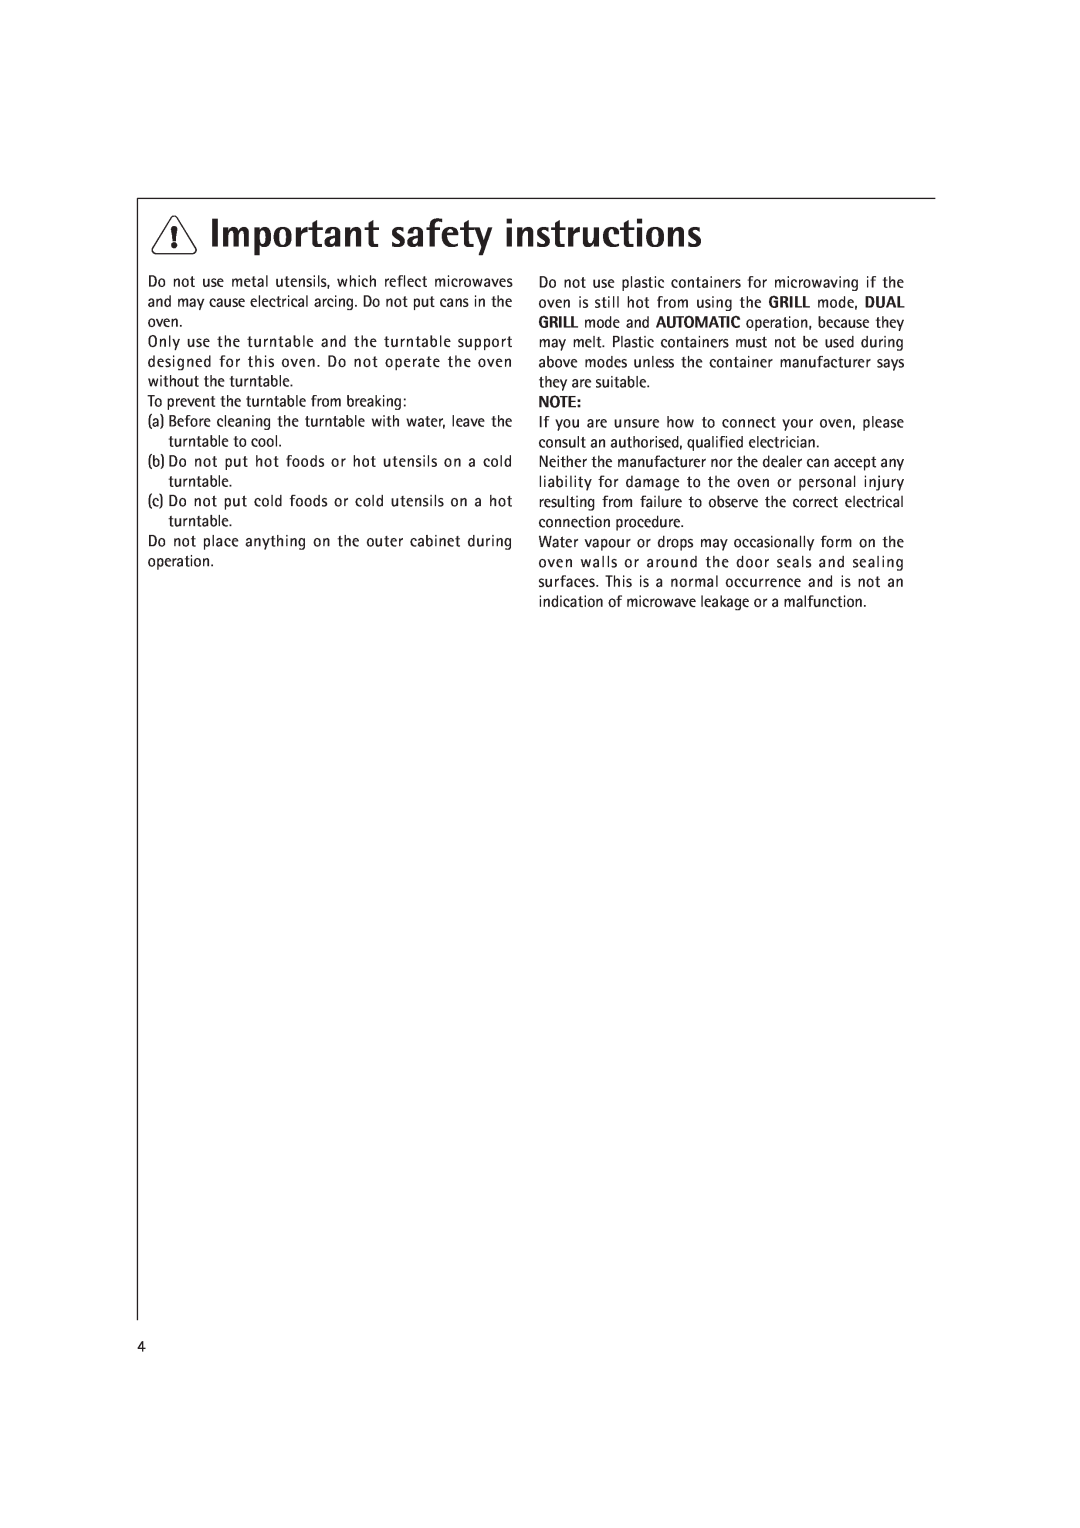 AEG MCD1761E, MCD1751E manual Important safety instructions, To prevent the turntable from breaking 